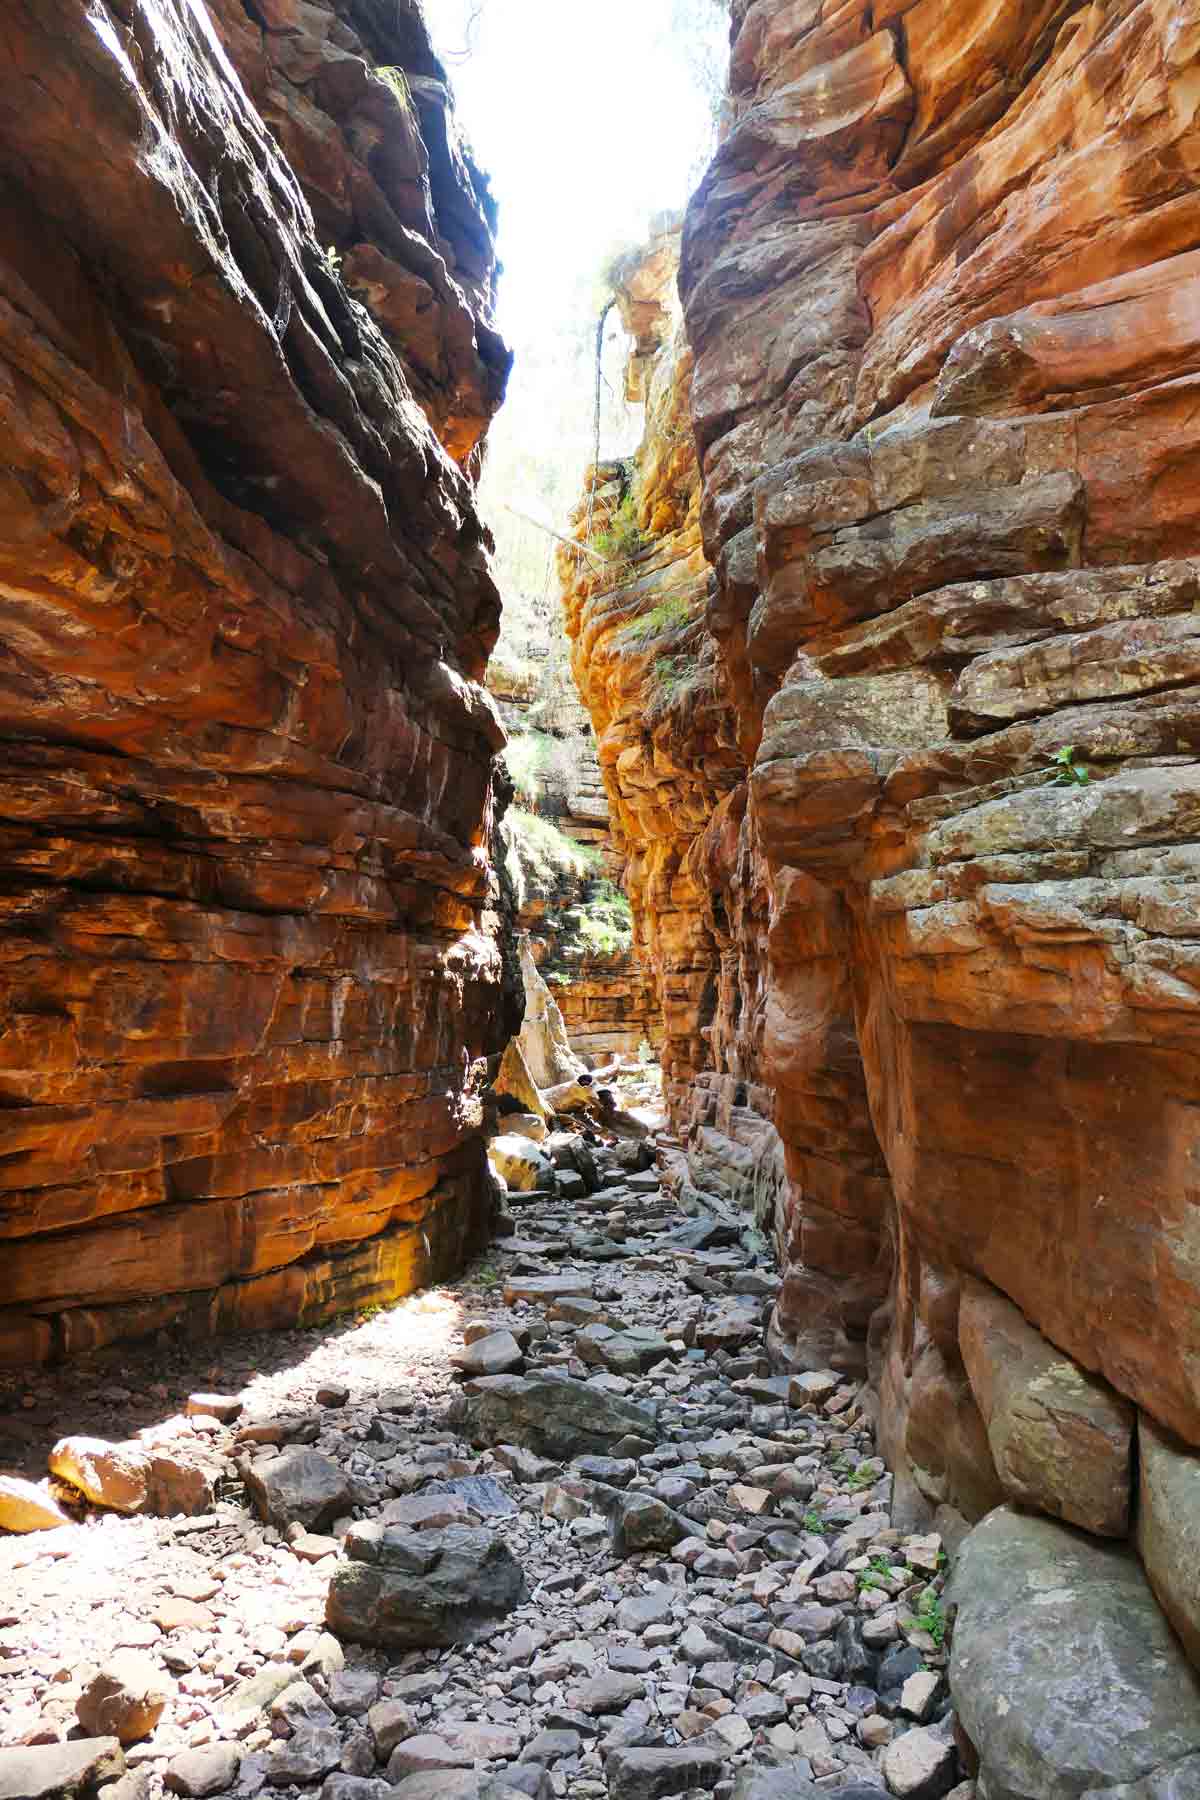 The Narrows at Alligator Gorge in Wilmington, South Australia